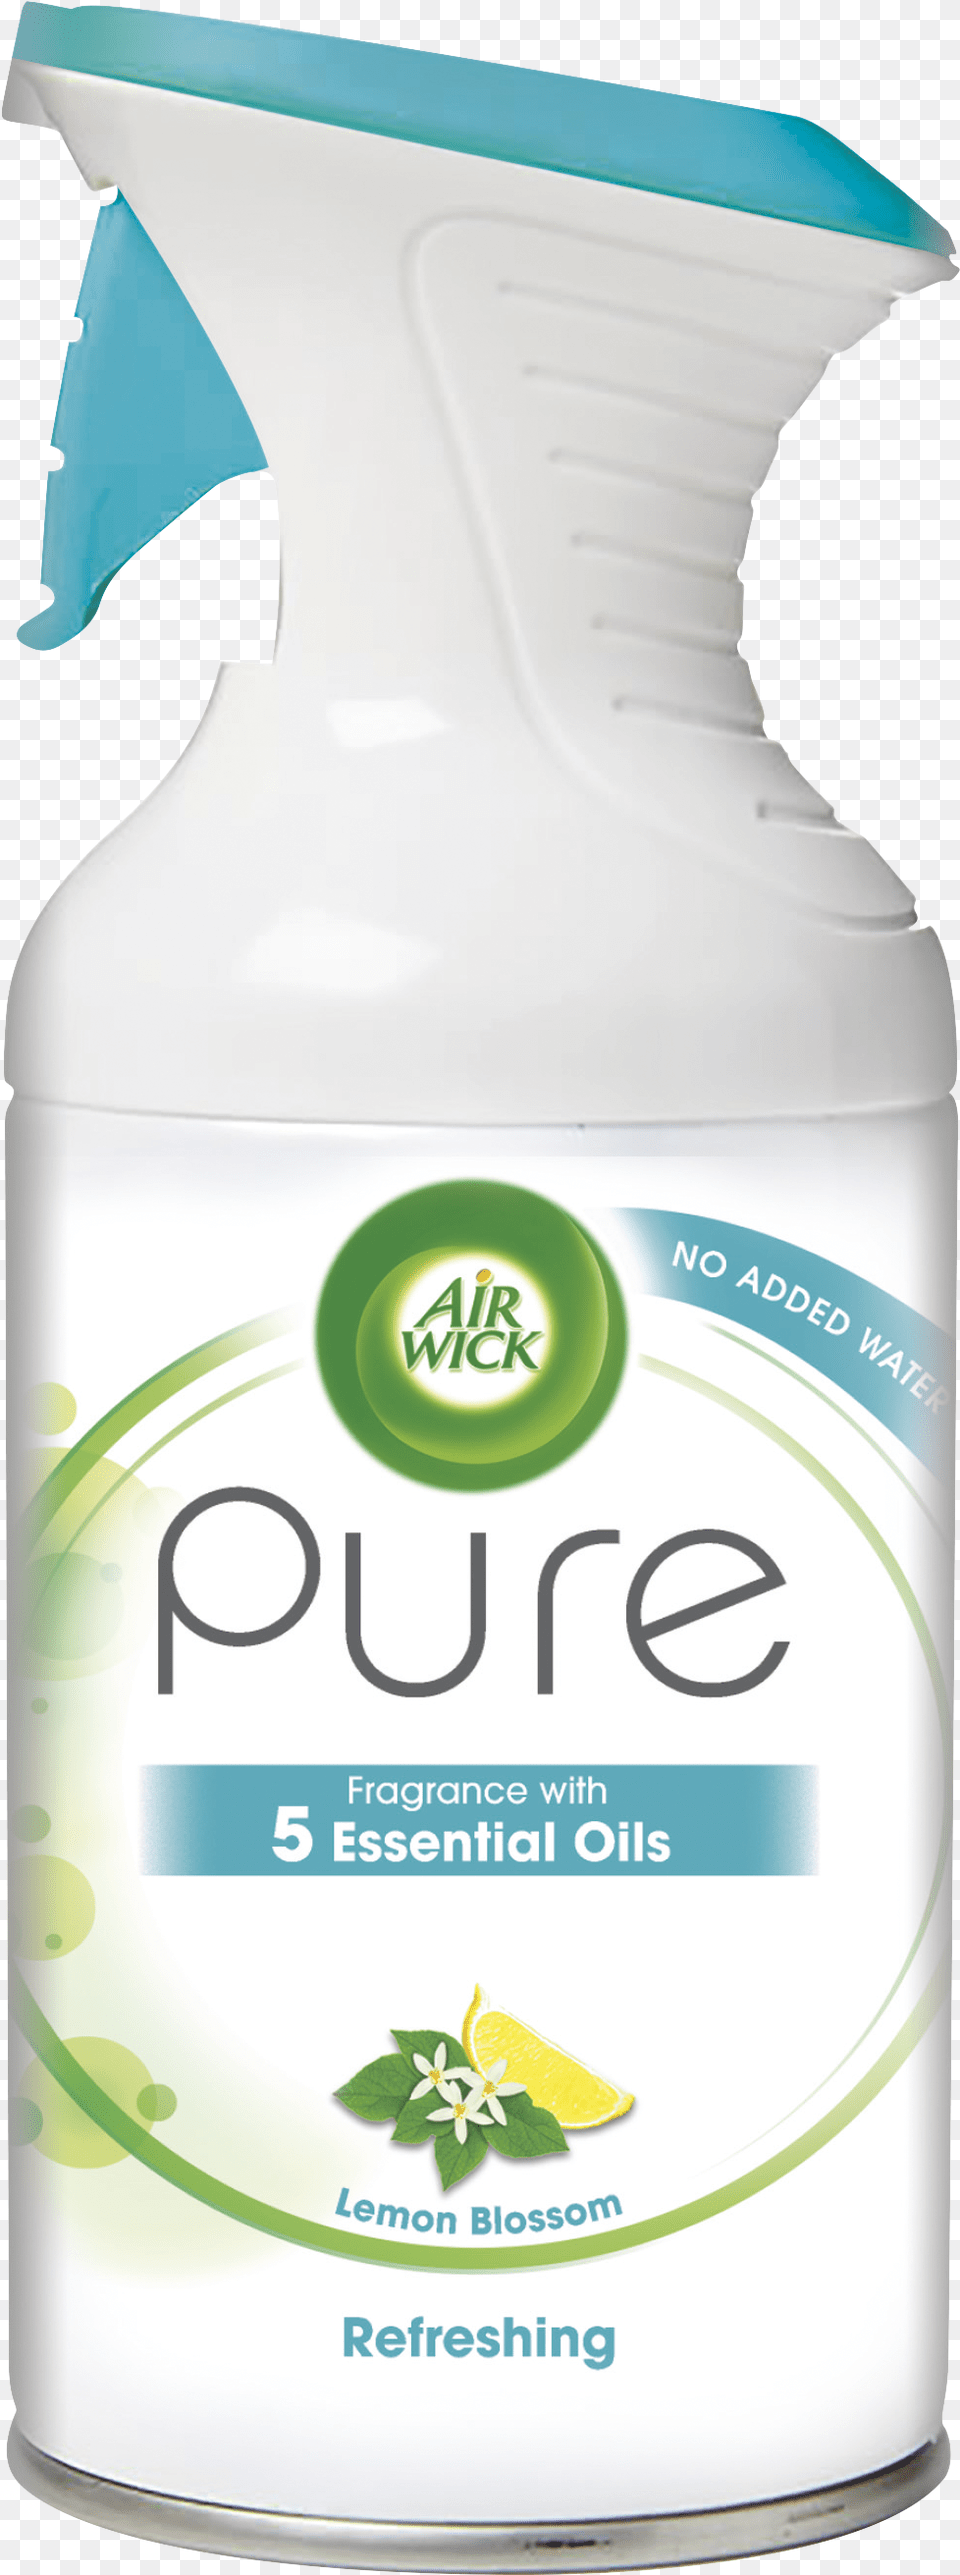 Air Wick Pure Essential Oils, Bottle, Can, Tin Free Transparent Png